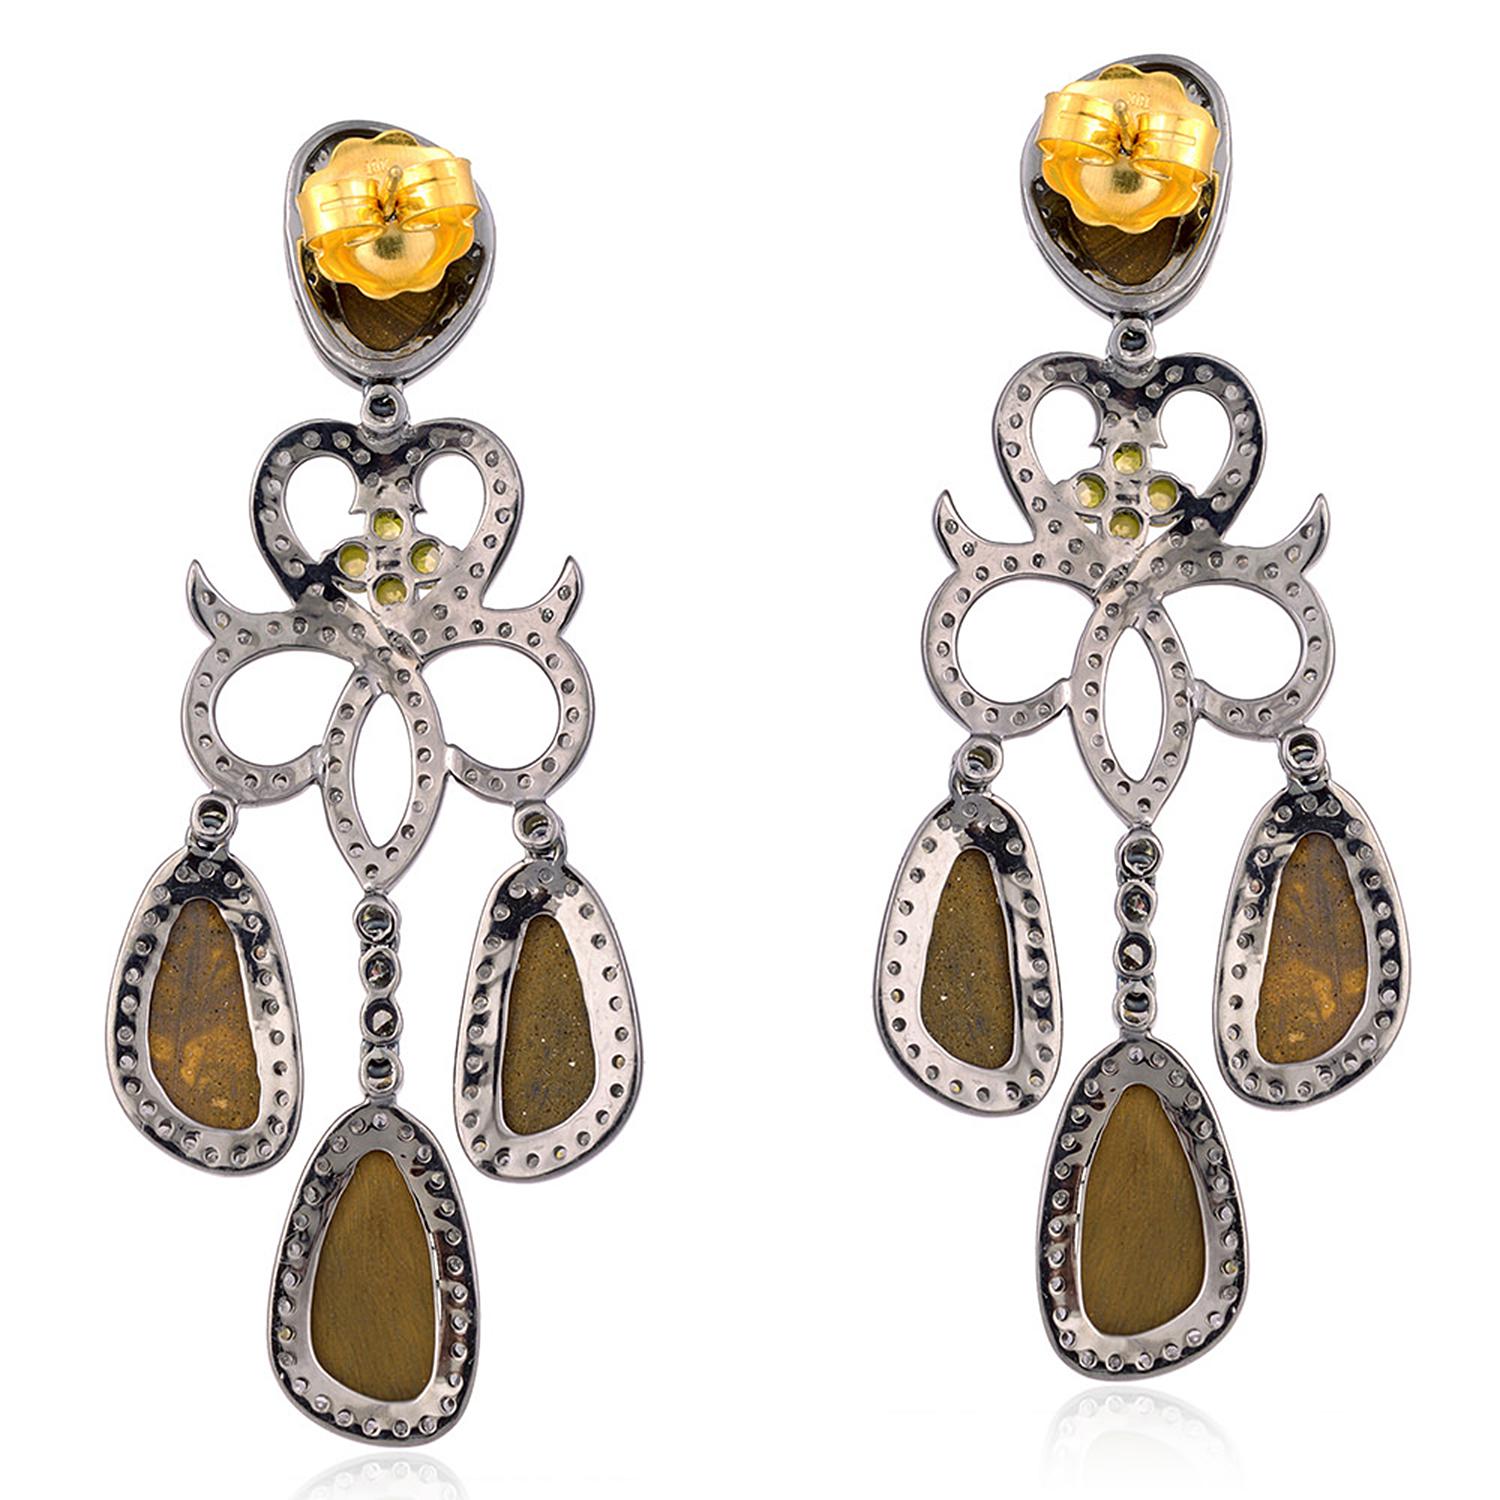 These stunning earrings are handmade in 18-karat gold and sterling silver.  
It is set with 14.4 carats opal doublets and 4.16 carats diamonds in blackened finish. 

FOLLOW  MEGHNA JEWELS storefront to view the latest collection & exclusive pieces. 